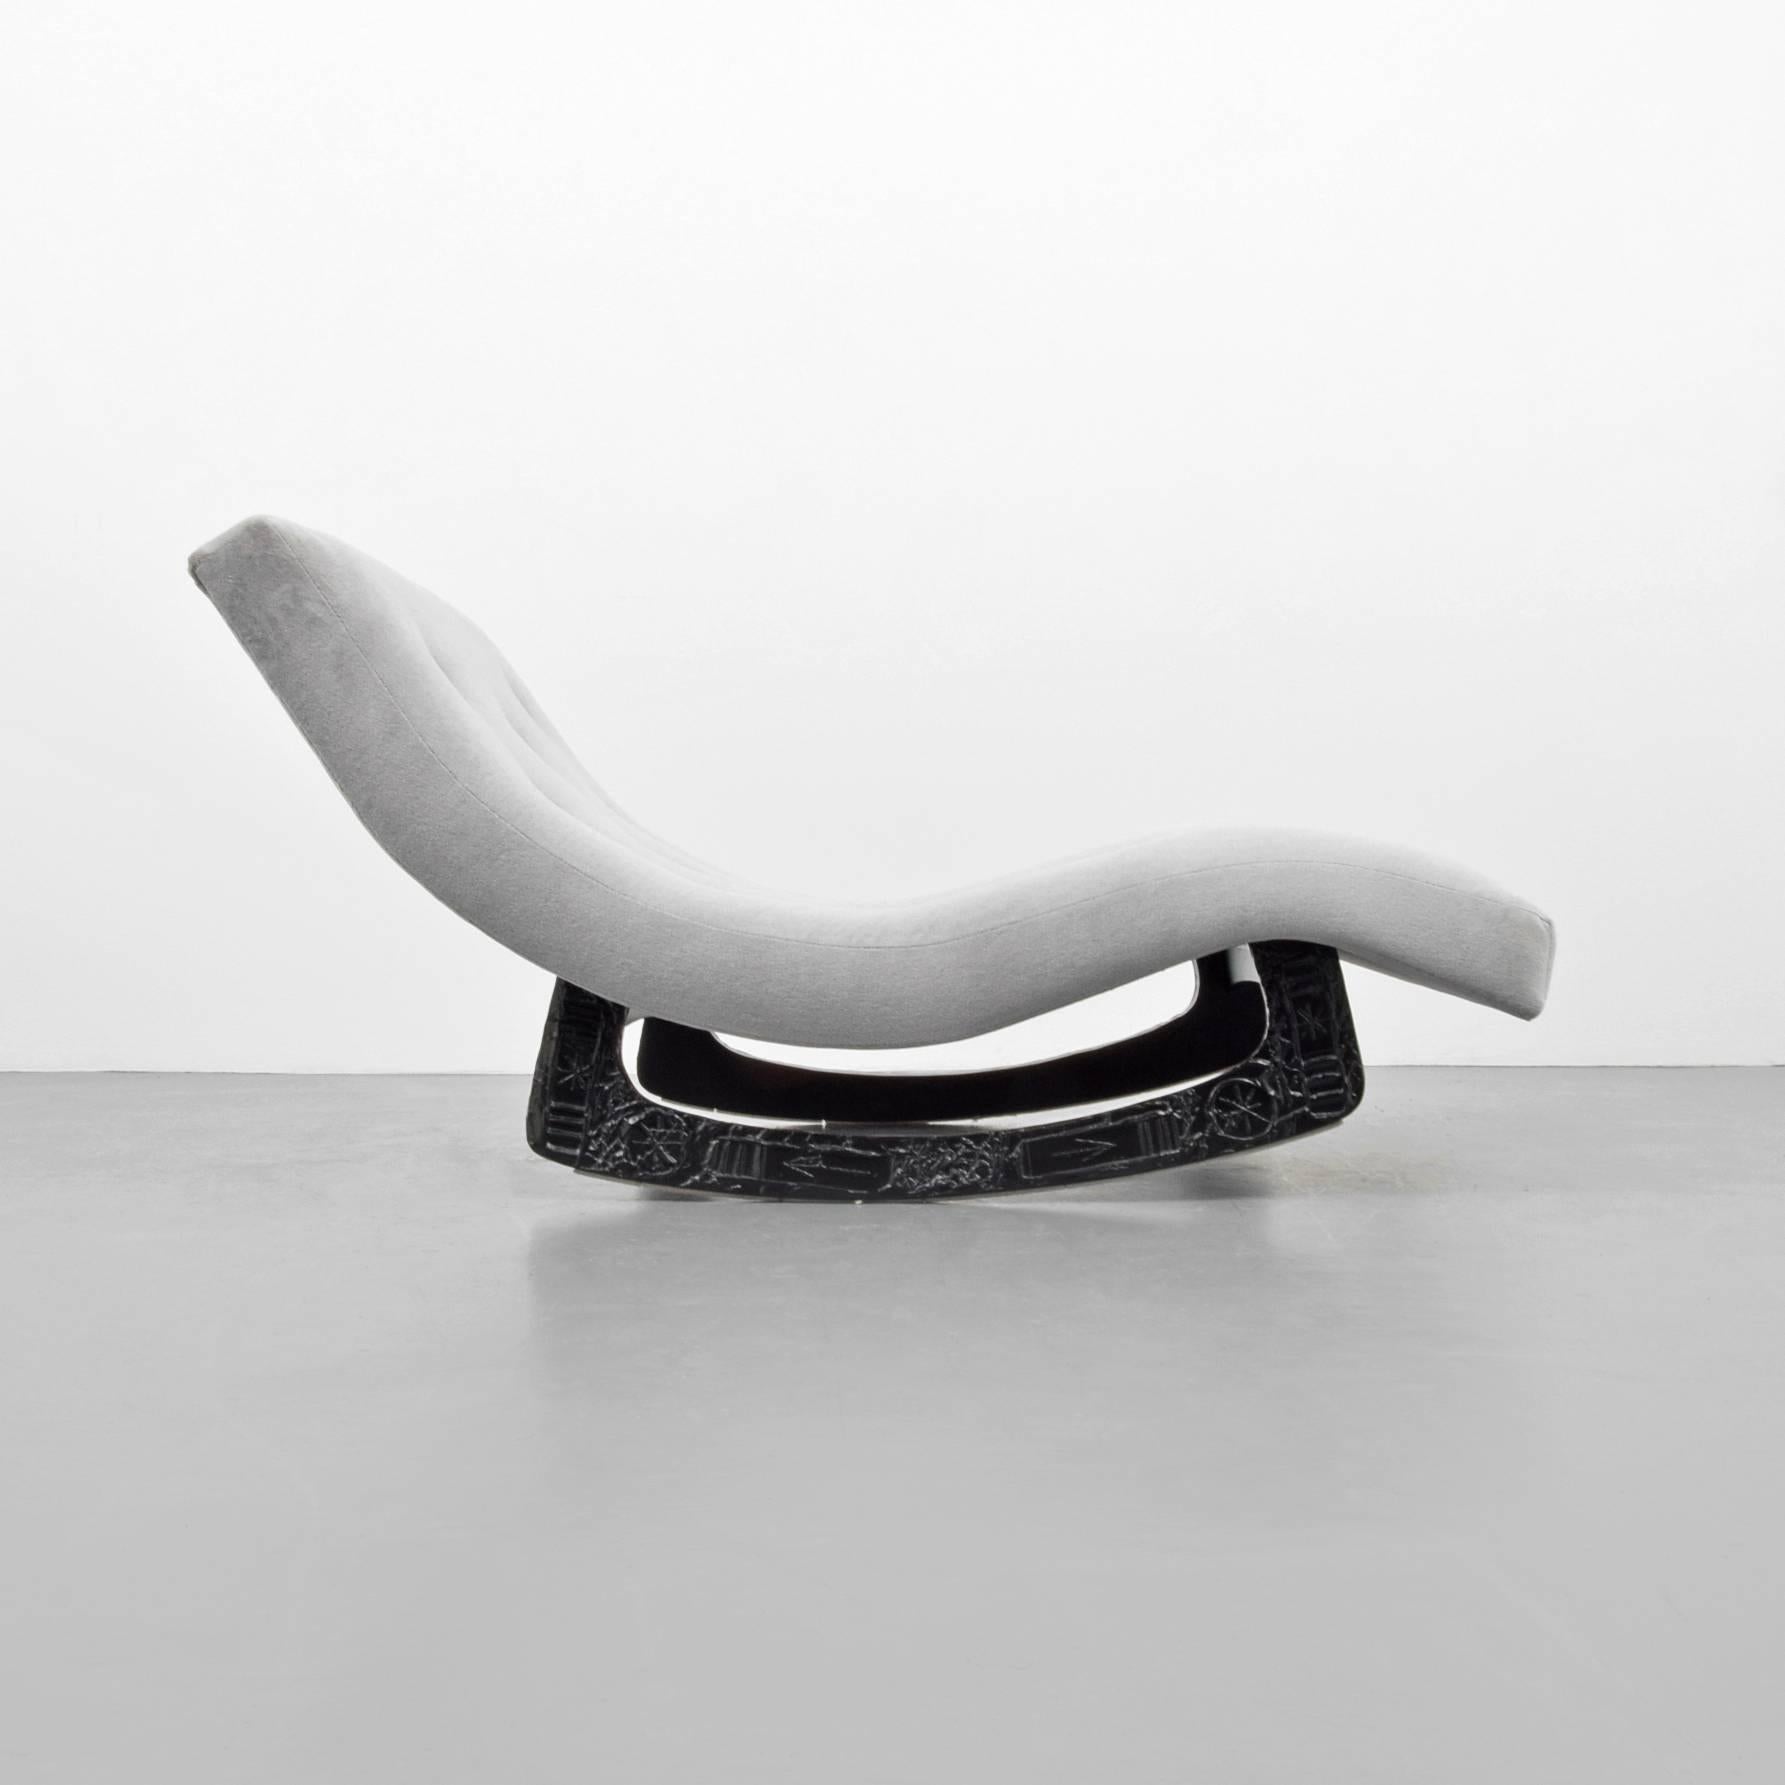 Rare Brutalist chaise/rocking lounge chair by Adrian Pearsall, 1960s, USA.